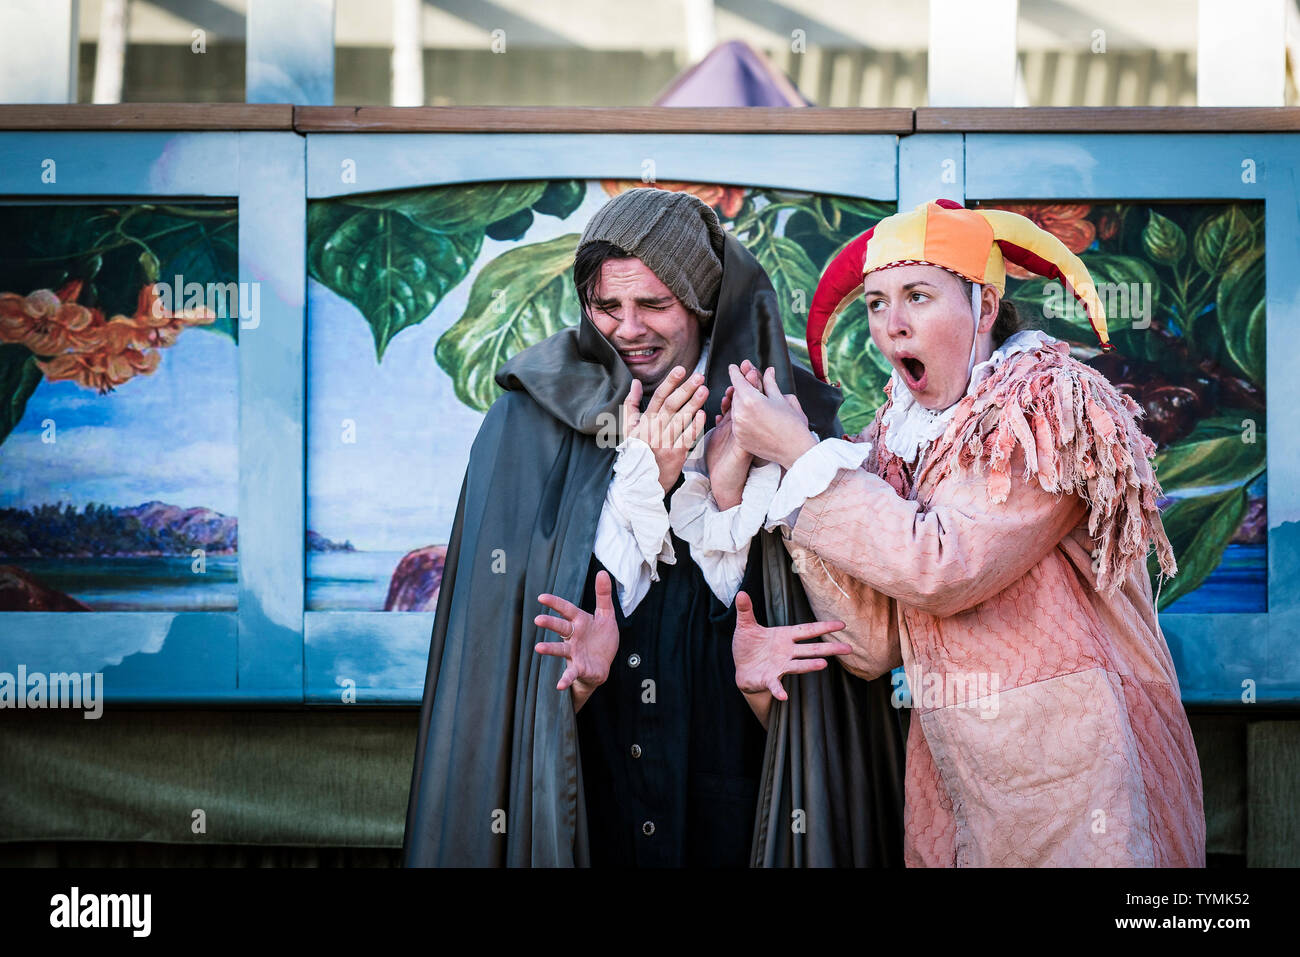 Actors Chris Wills; Katy Helps, performing the roles of Caliban and Trinculo in an outdoor theatre production of The Tempest by Illyria Theatre in Fal Stock Photo